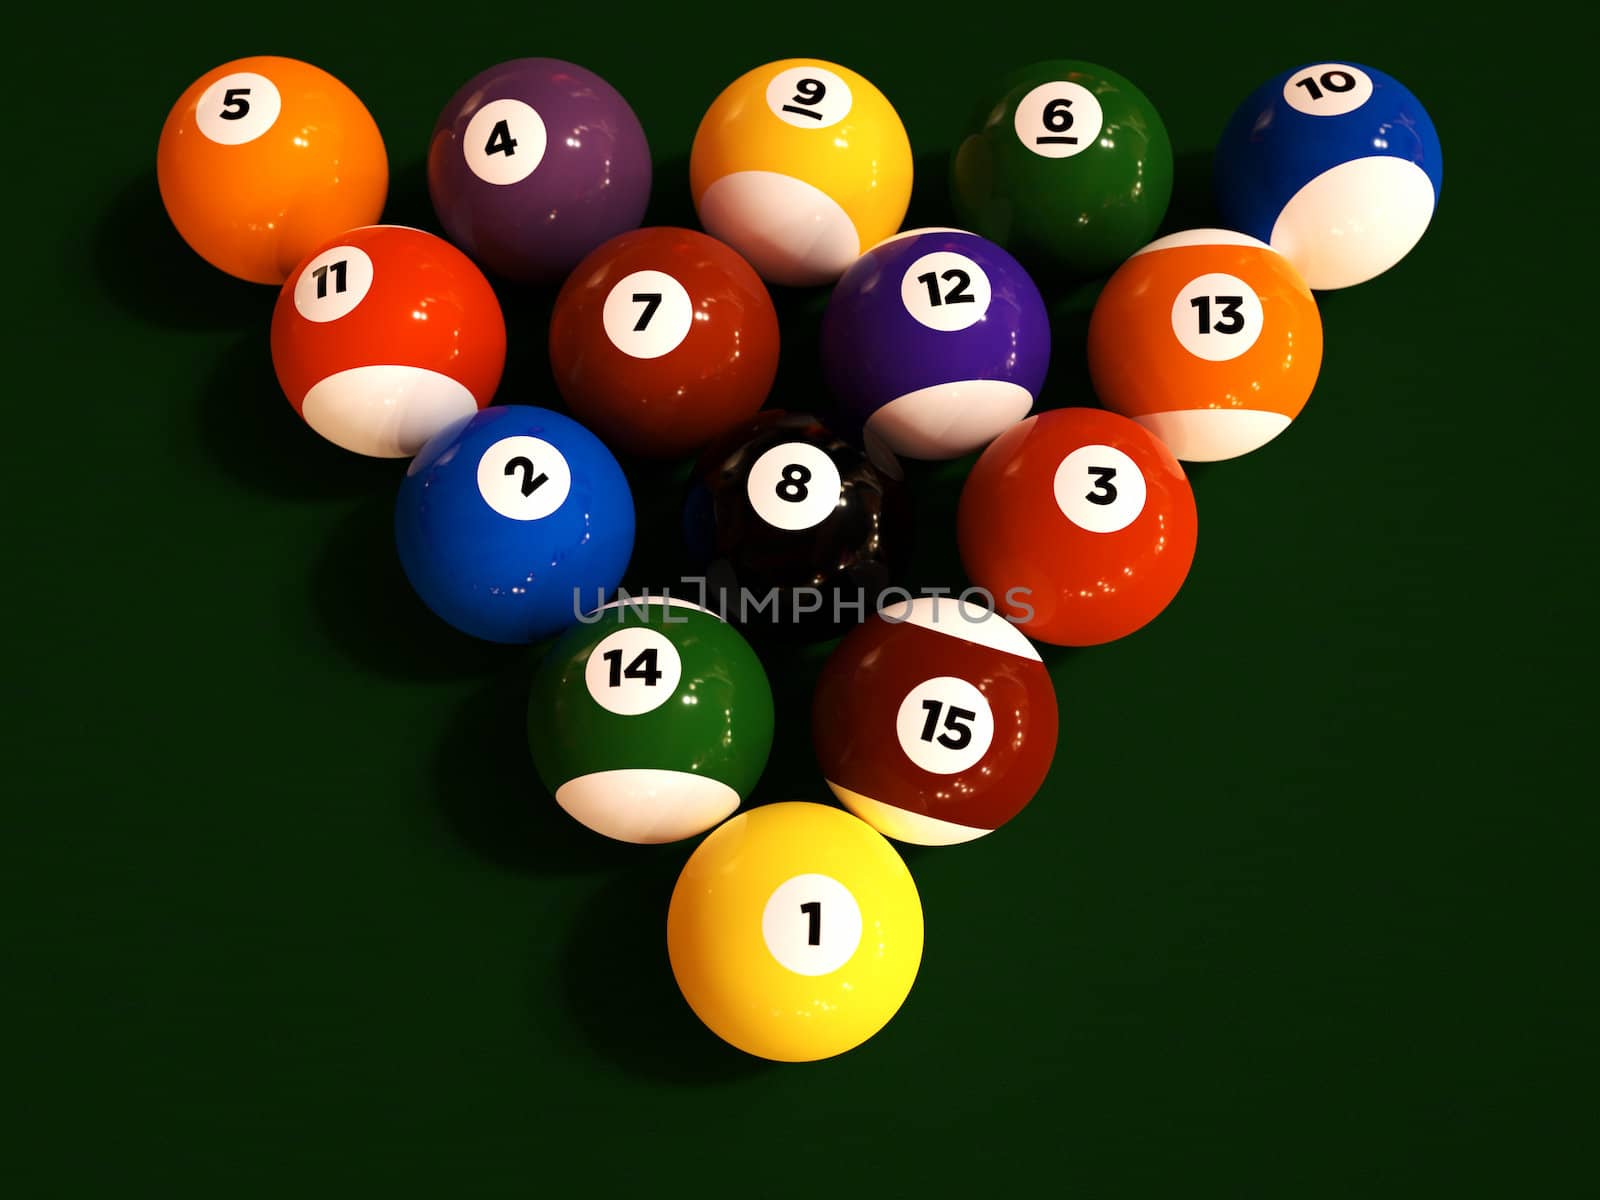 A set of racked pool balls on a table with the 8 ball in the center.